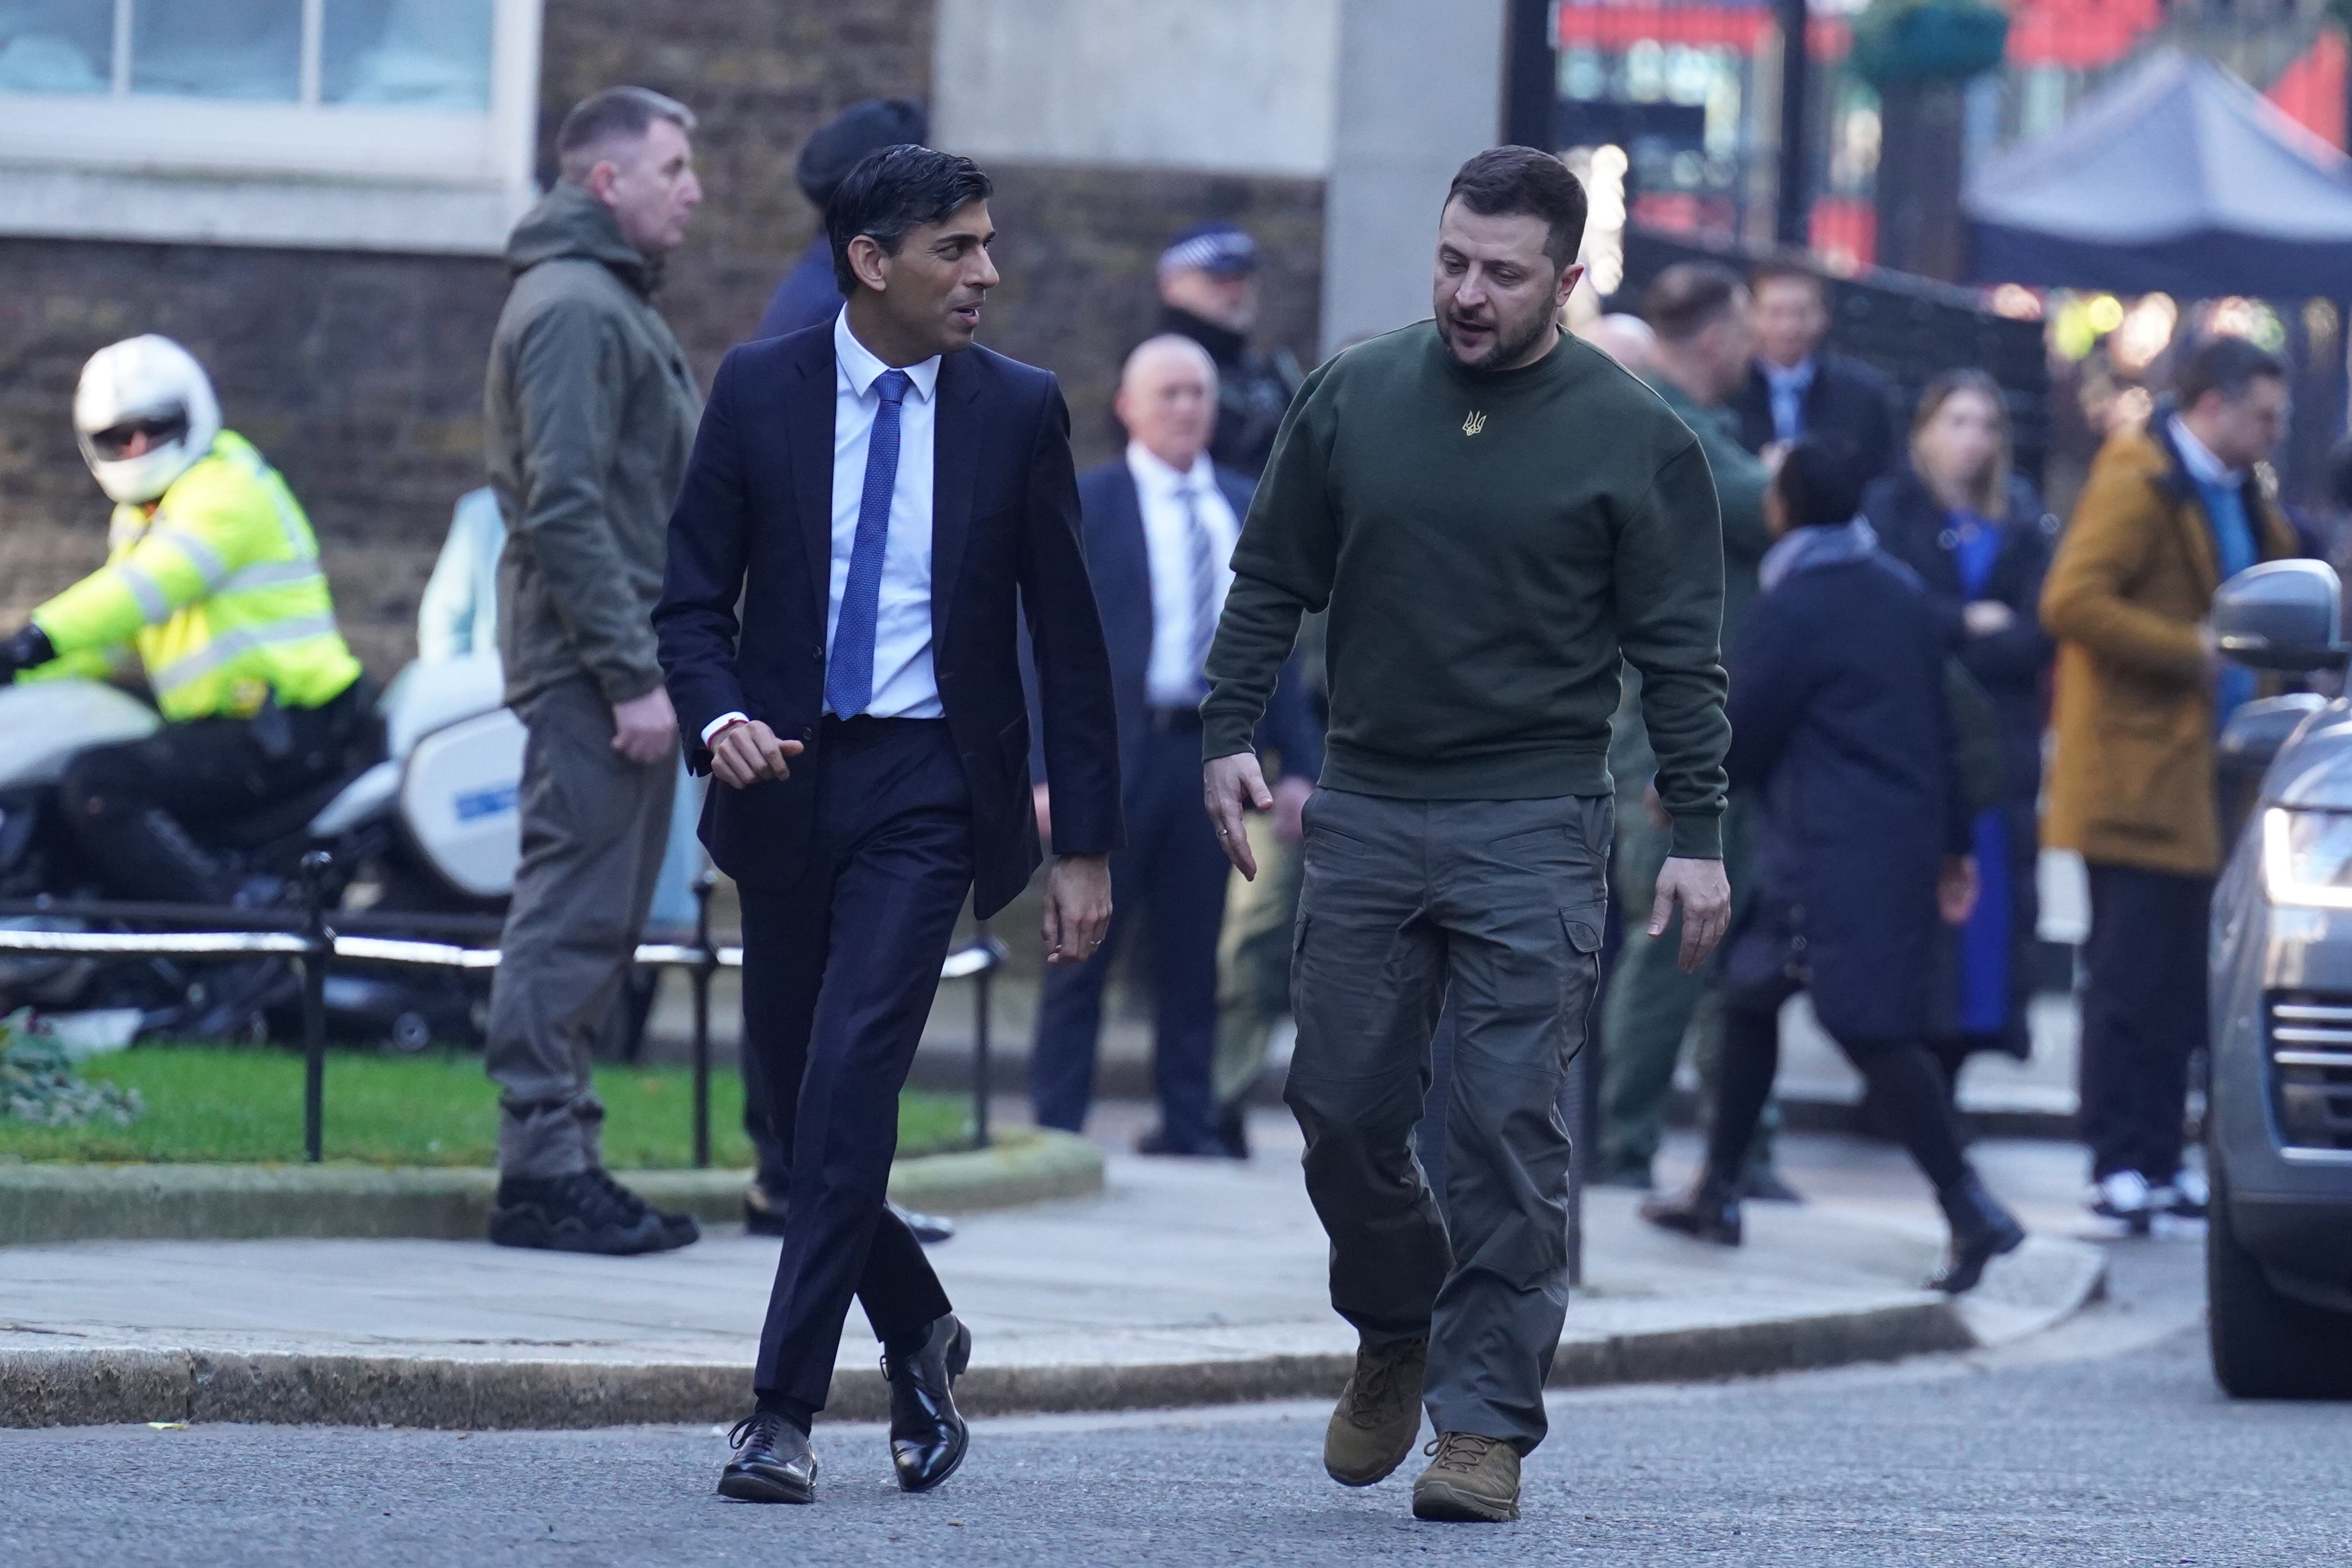 Ukrainian President Volodymyr Zelensky outside 10 Downing Street, London, ahead of a bilateral meeting with Prime Minister Rishi Sunak during his first visit to the UK since the Russian invasion of Ukraine. Picture date: Wednesday February 8, 2023.